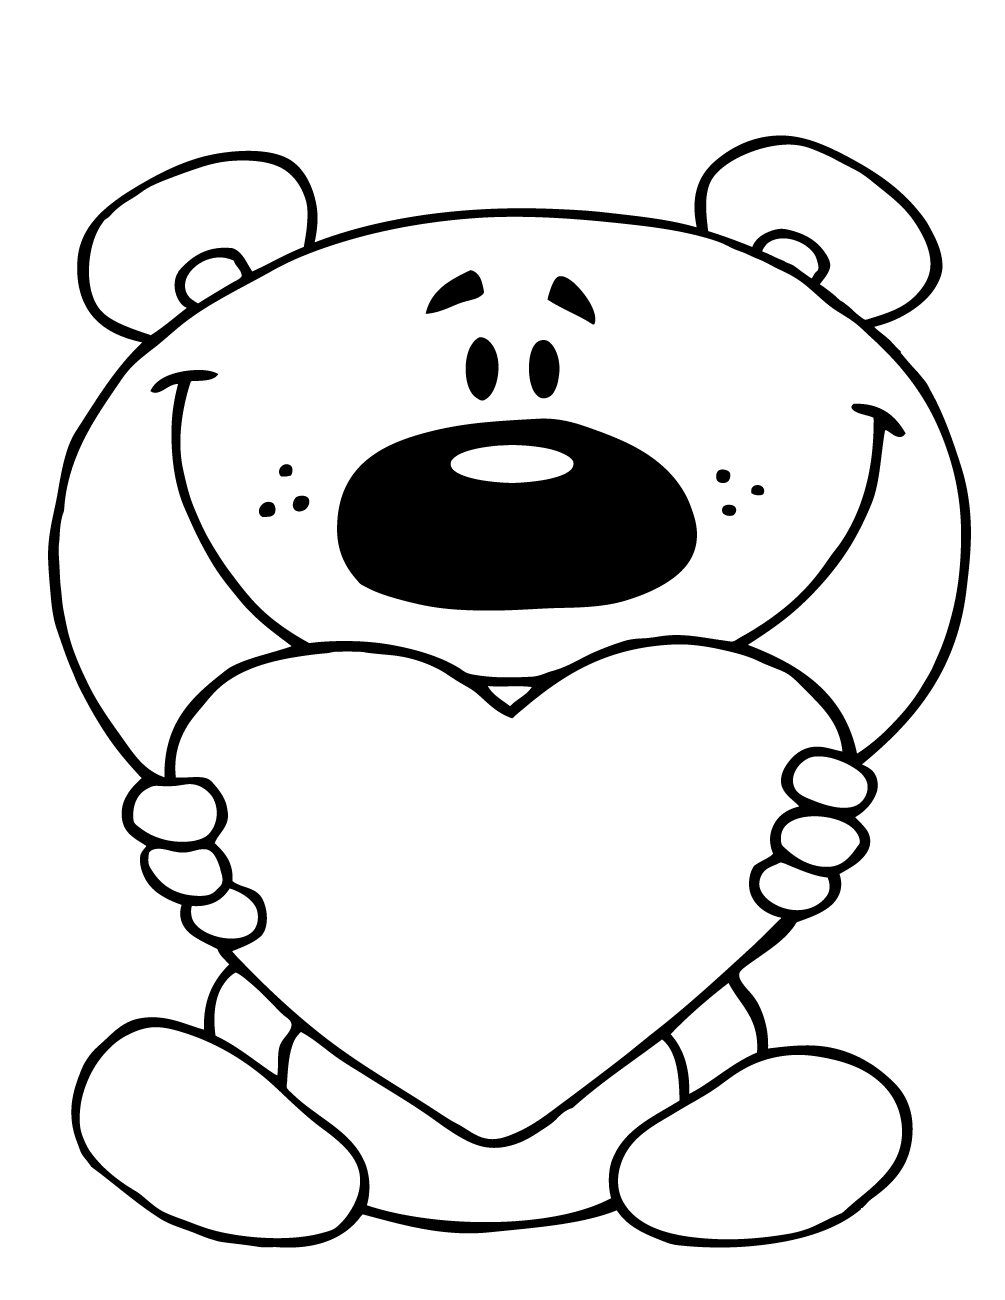 Teddy Bear Holding A Red Heart Coloring Page